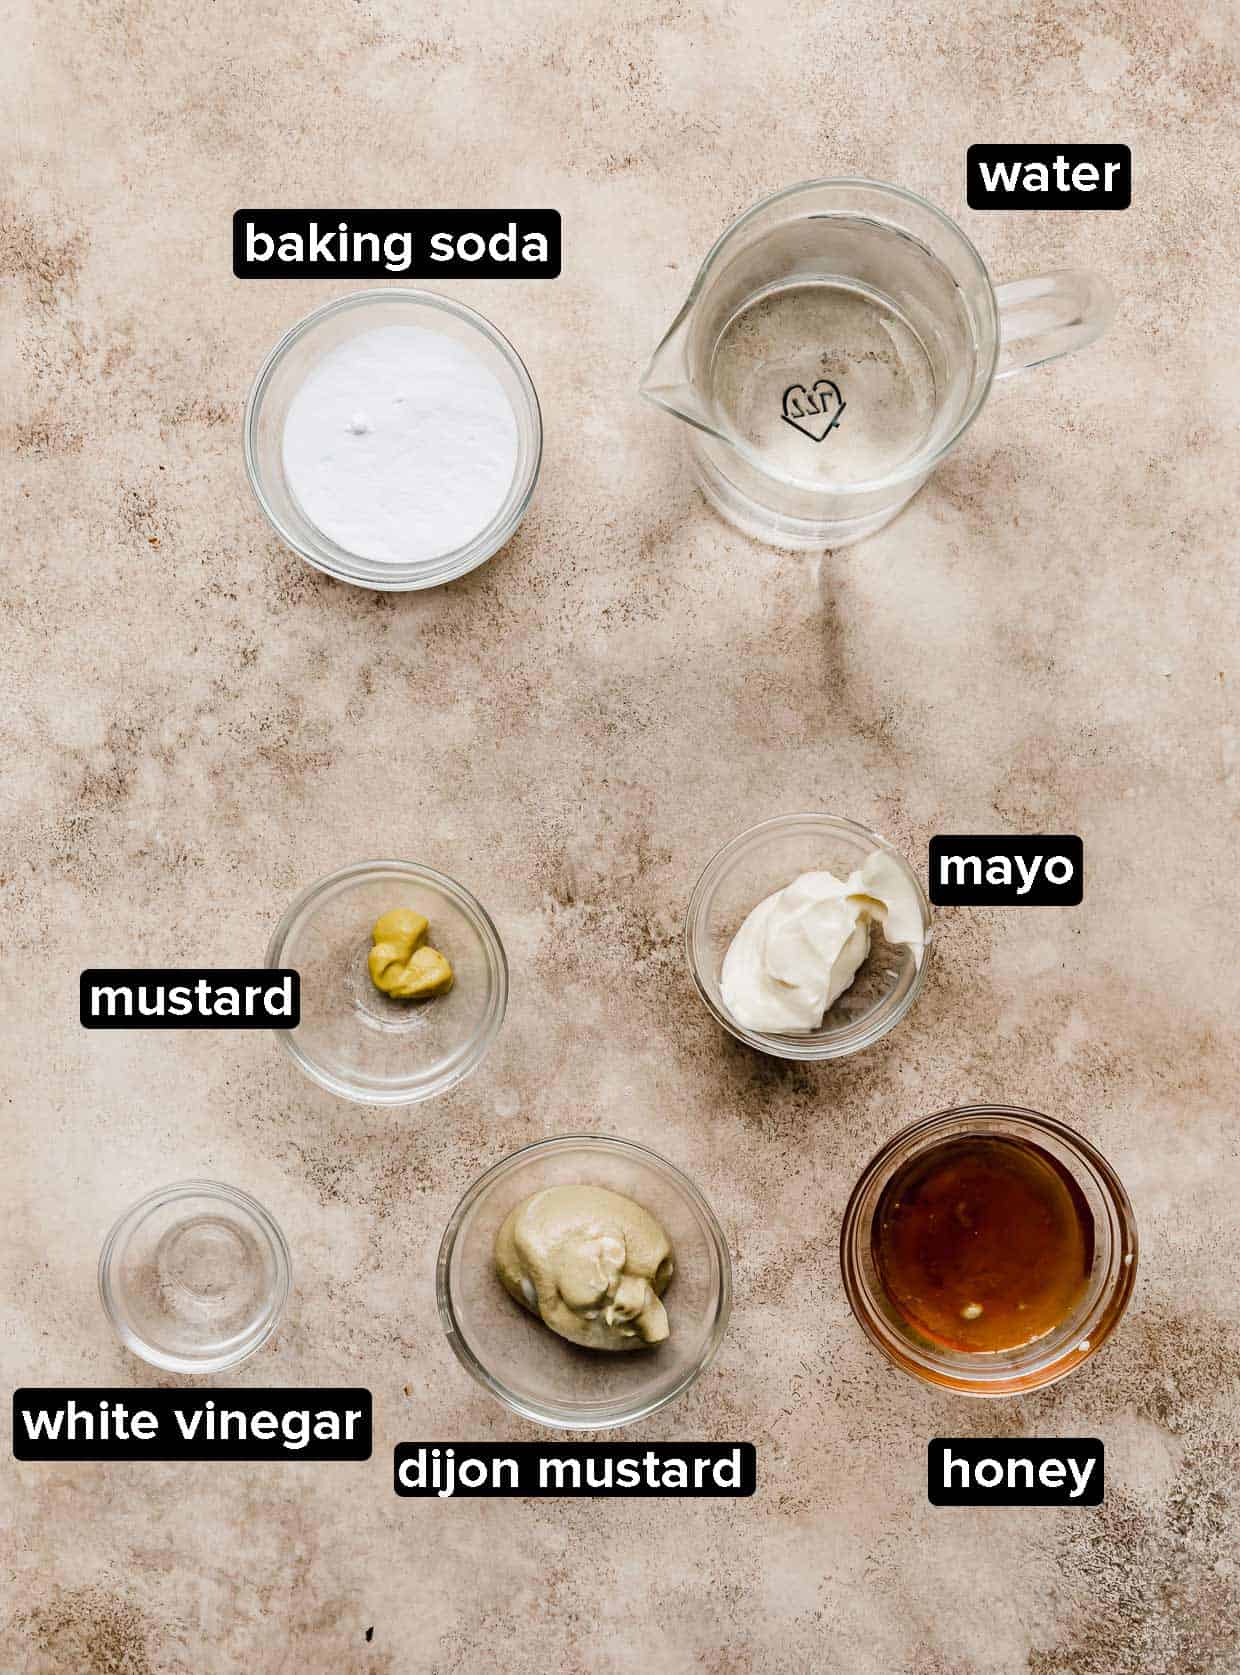 Ingredients used to make the baking soda bath for pretzels and a homemade dijon mustard dip.